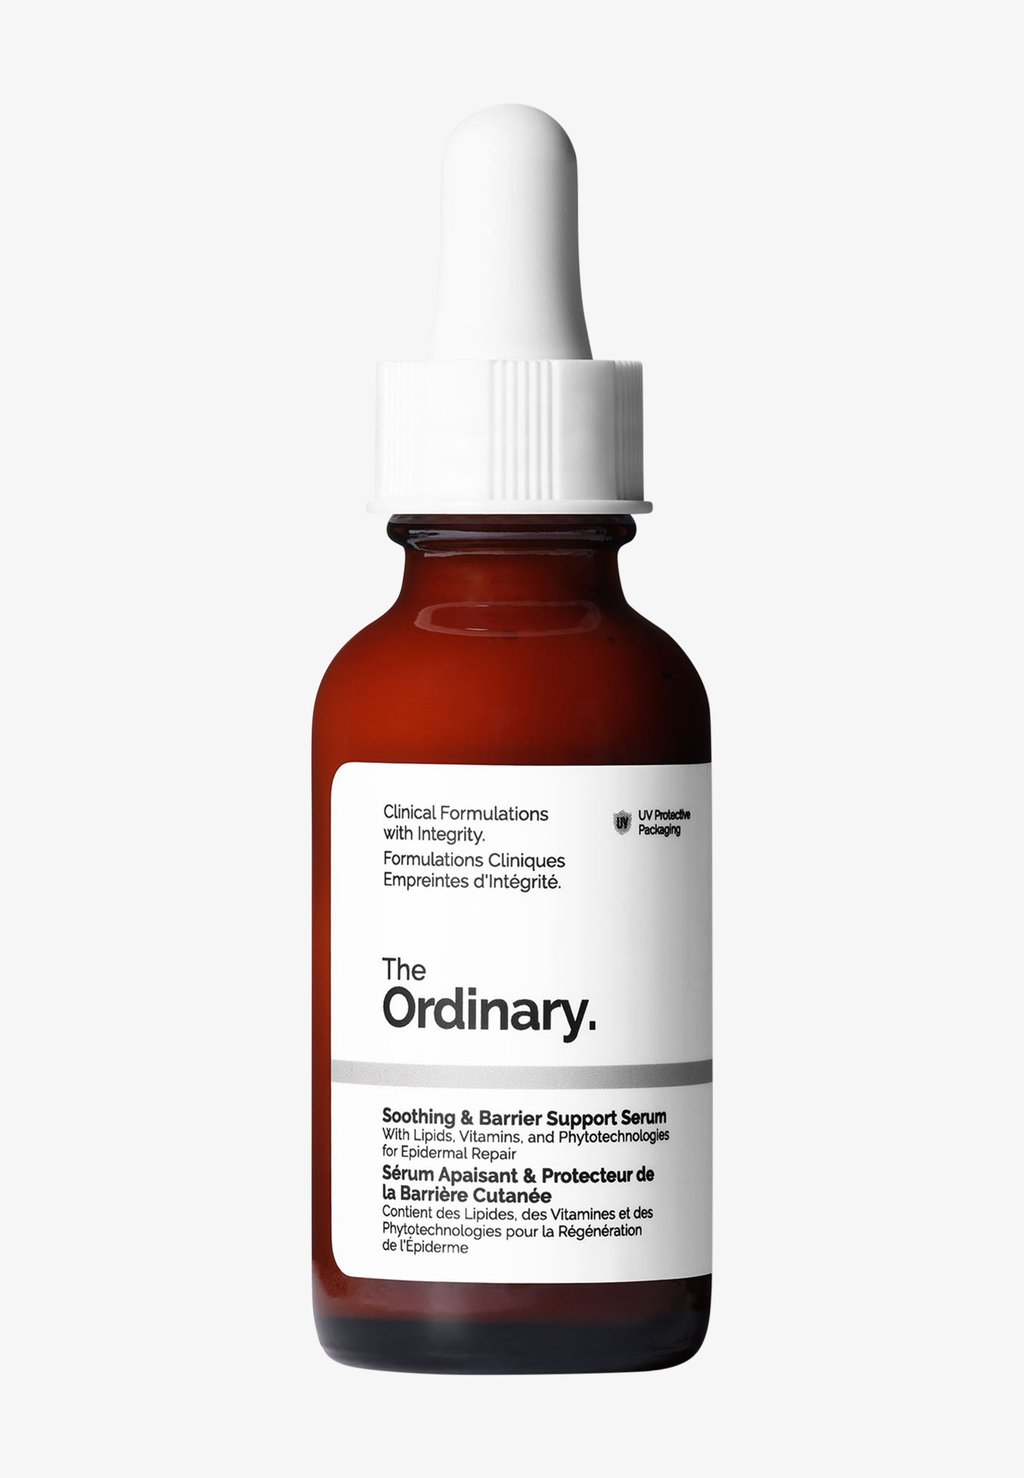 Сыворотка Soothing & Barrier Support Serum The Ordinary